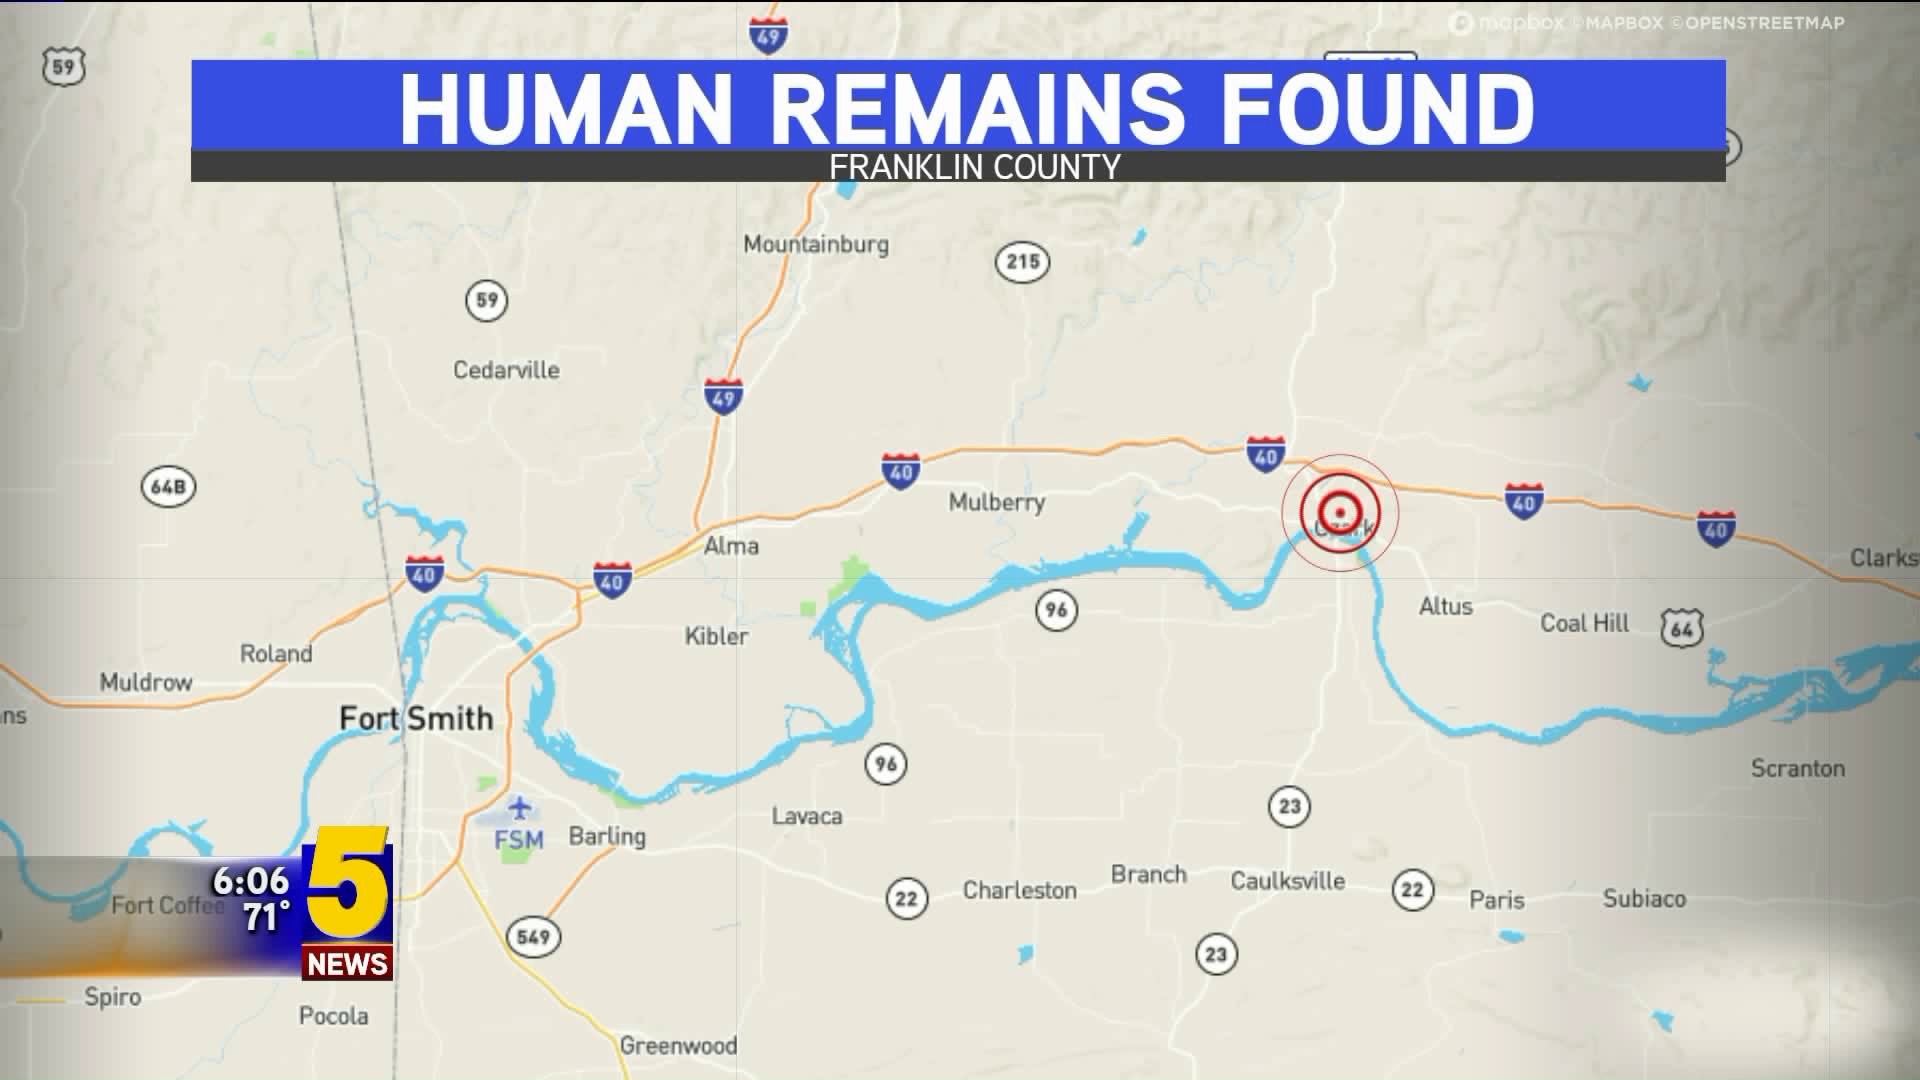 Human Remains Found in Franklin County